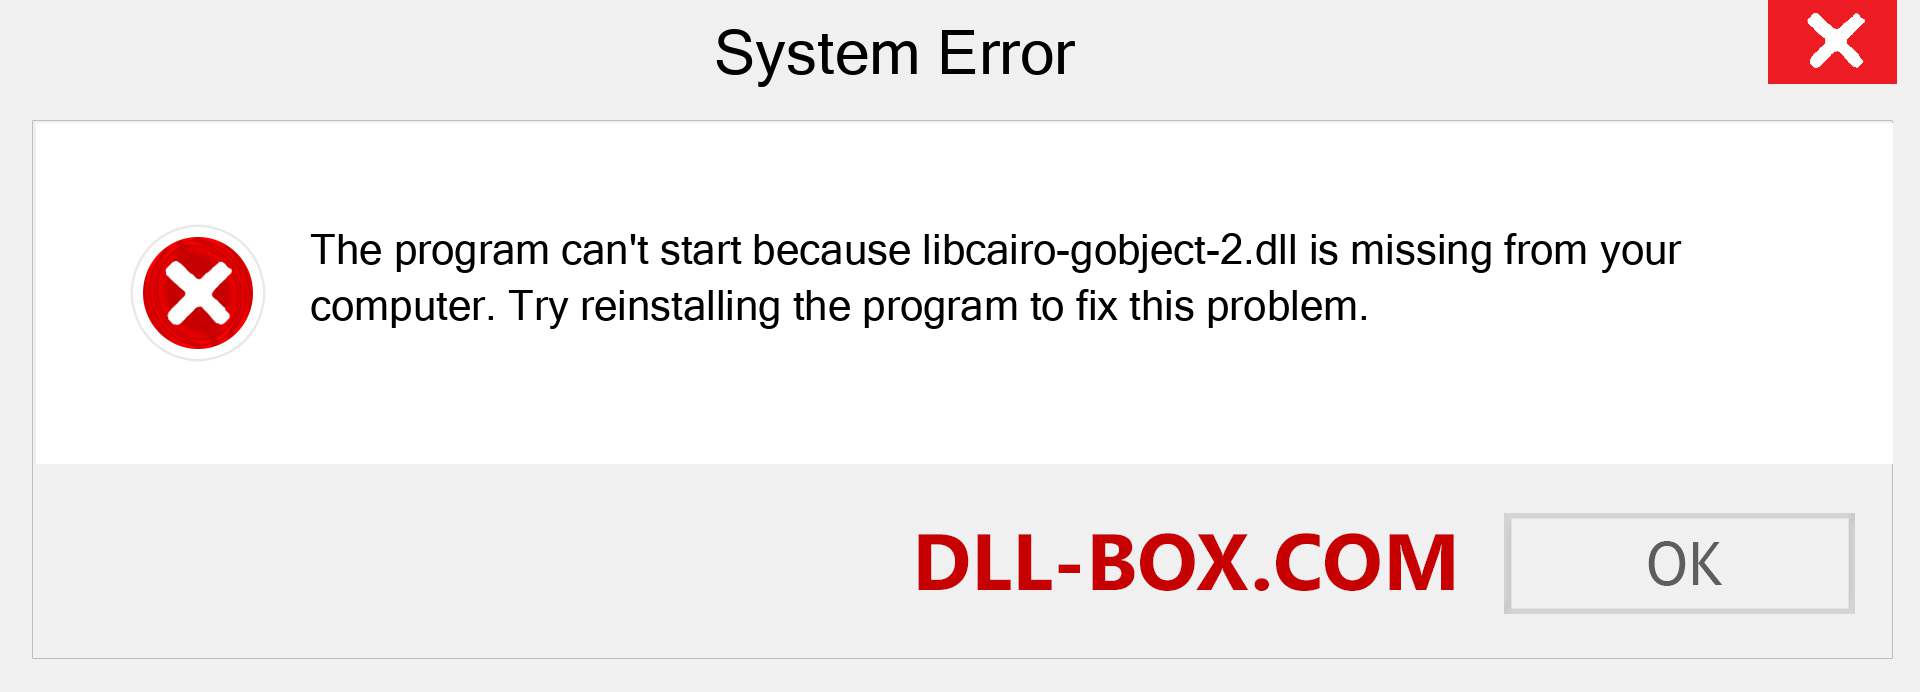  libcairo-gobject-2.dll file is missing?. Download for Windows 7, 8, 10 - Fix  libcairo-gobject-2 dll Missing Error on Windows, photos, images